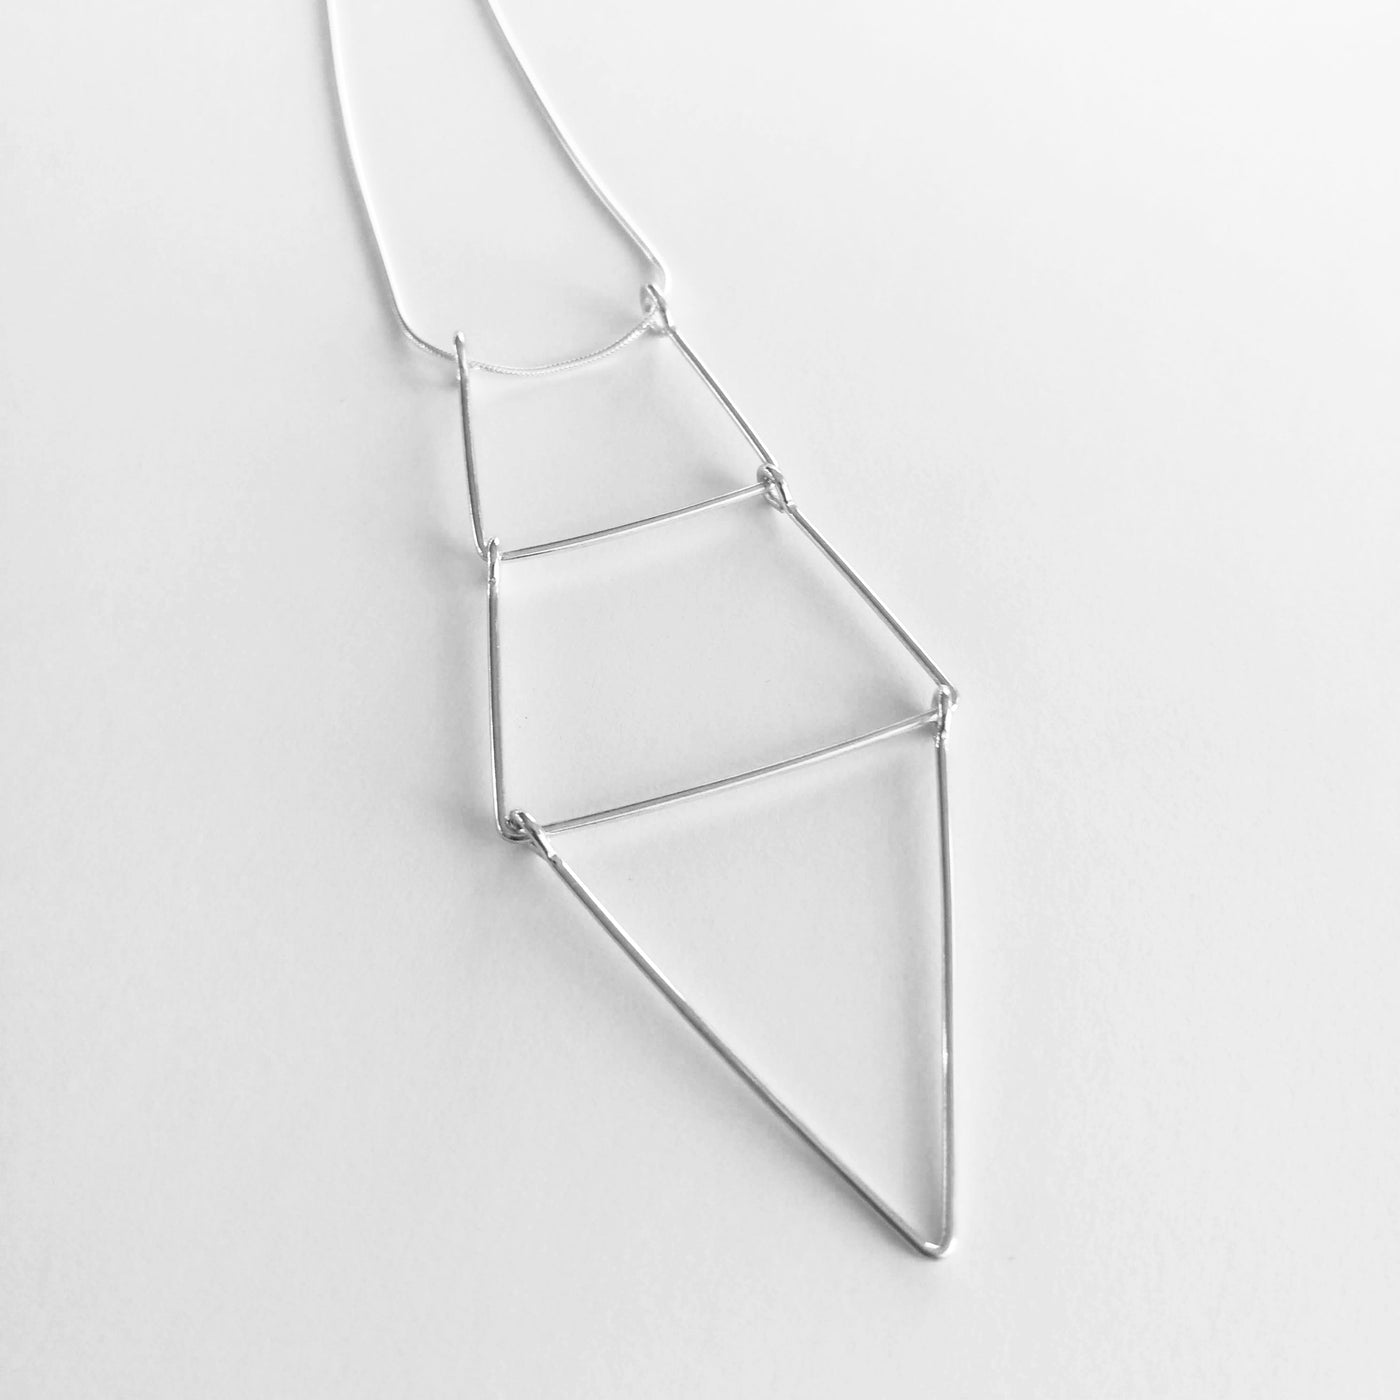 A close up image of the Kinetic Ladder Pendant